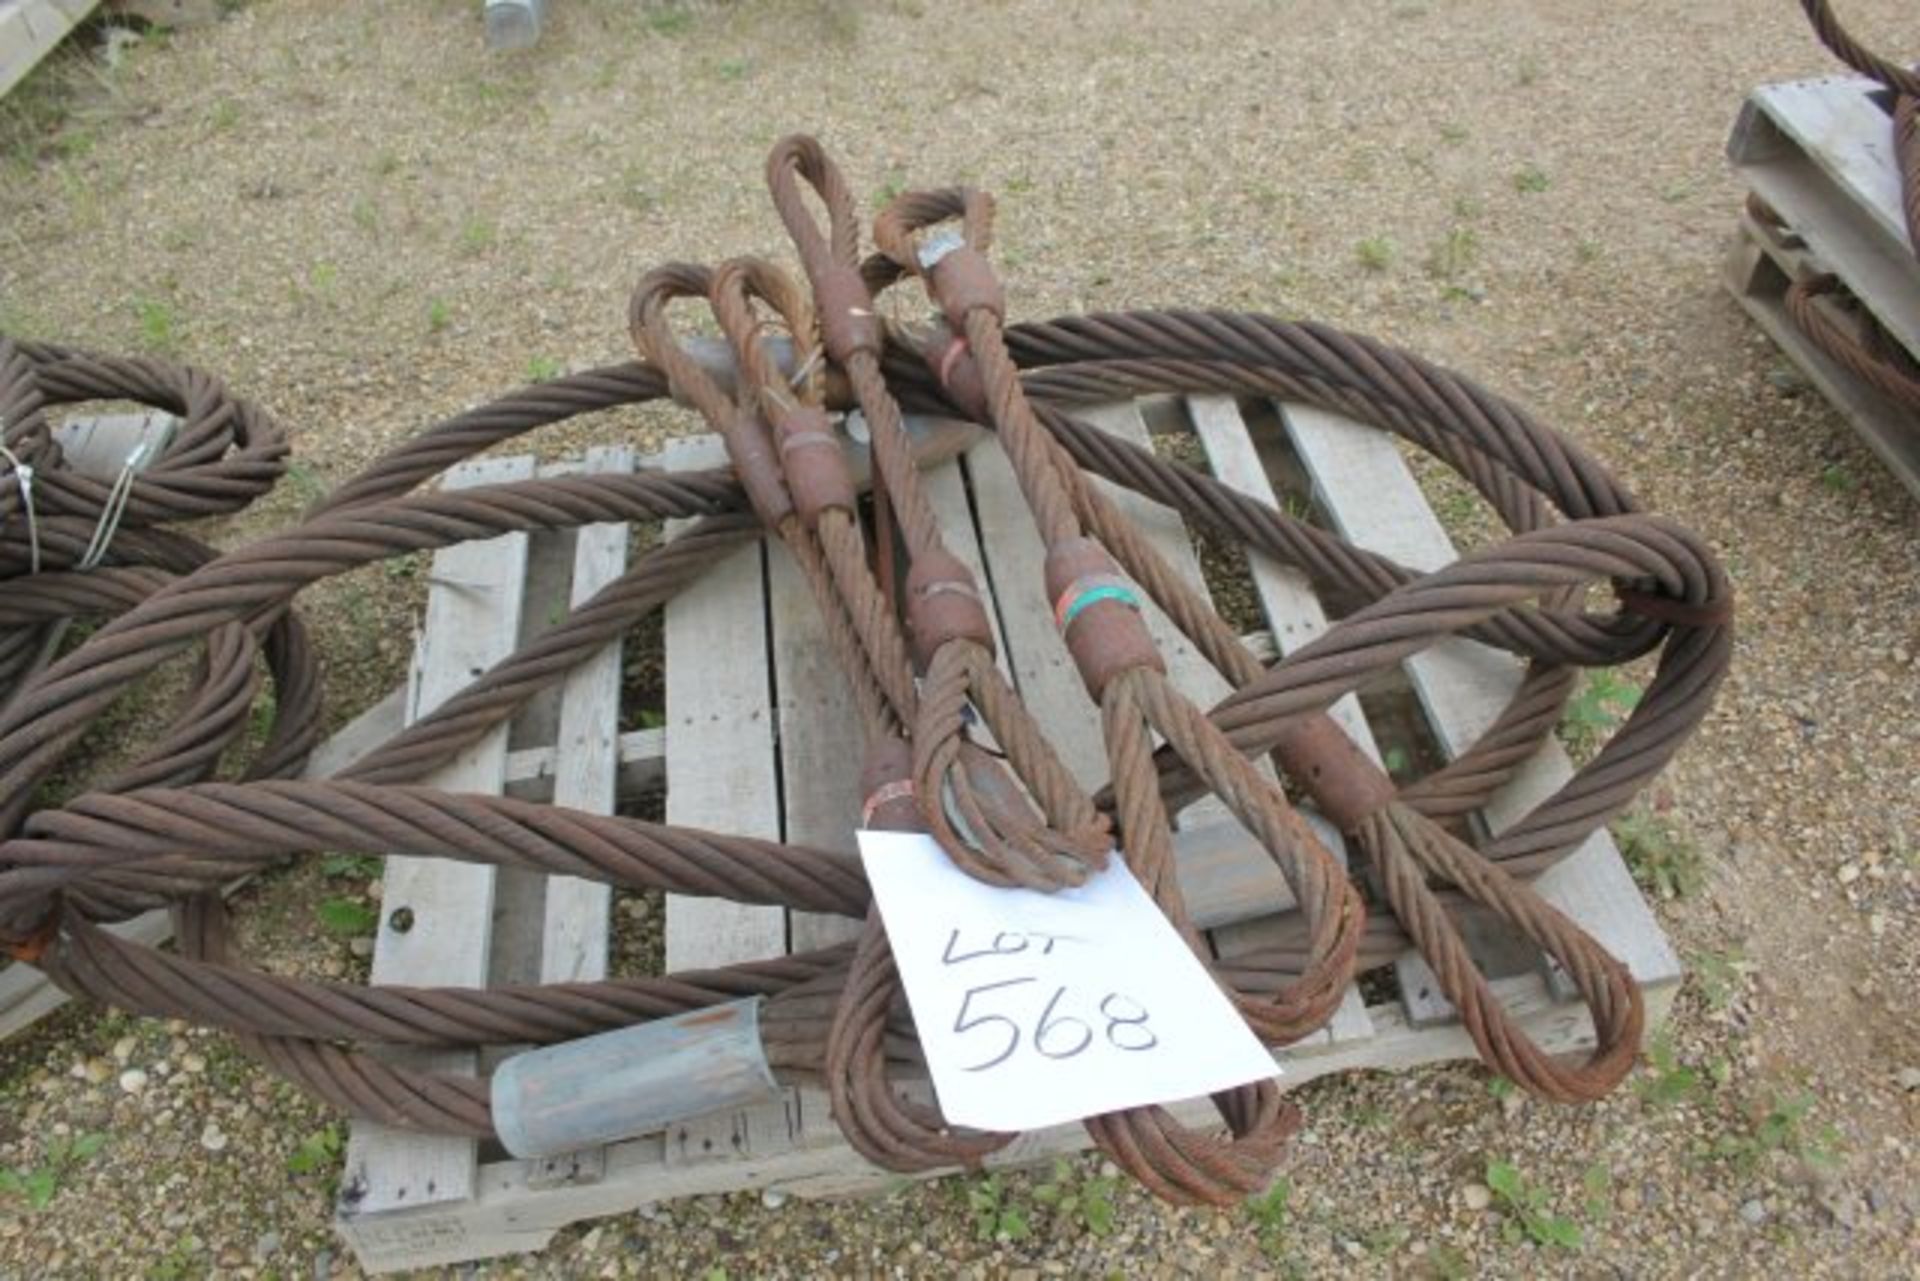 12'X 74000# & 4-4' X 36000# WIRE ROPE SLINGS